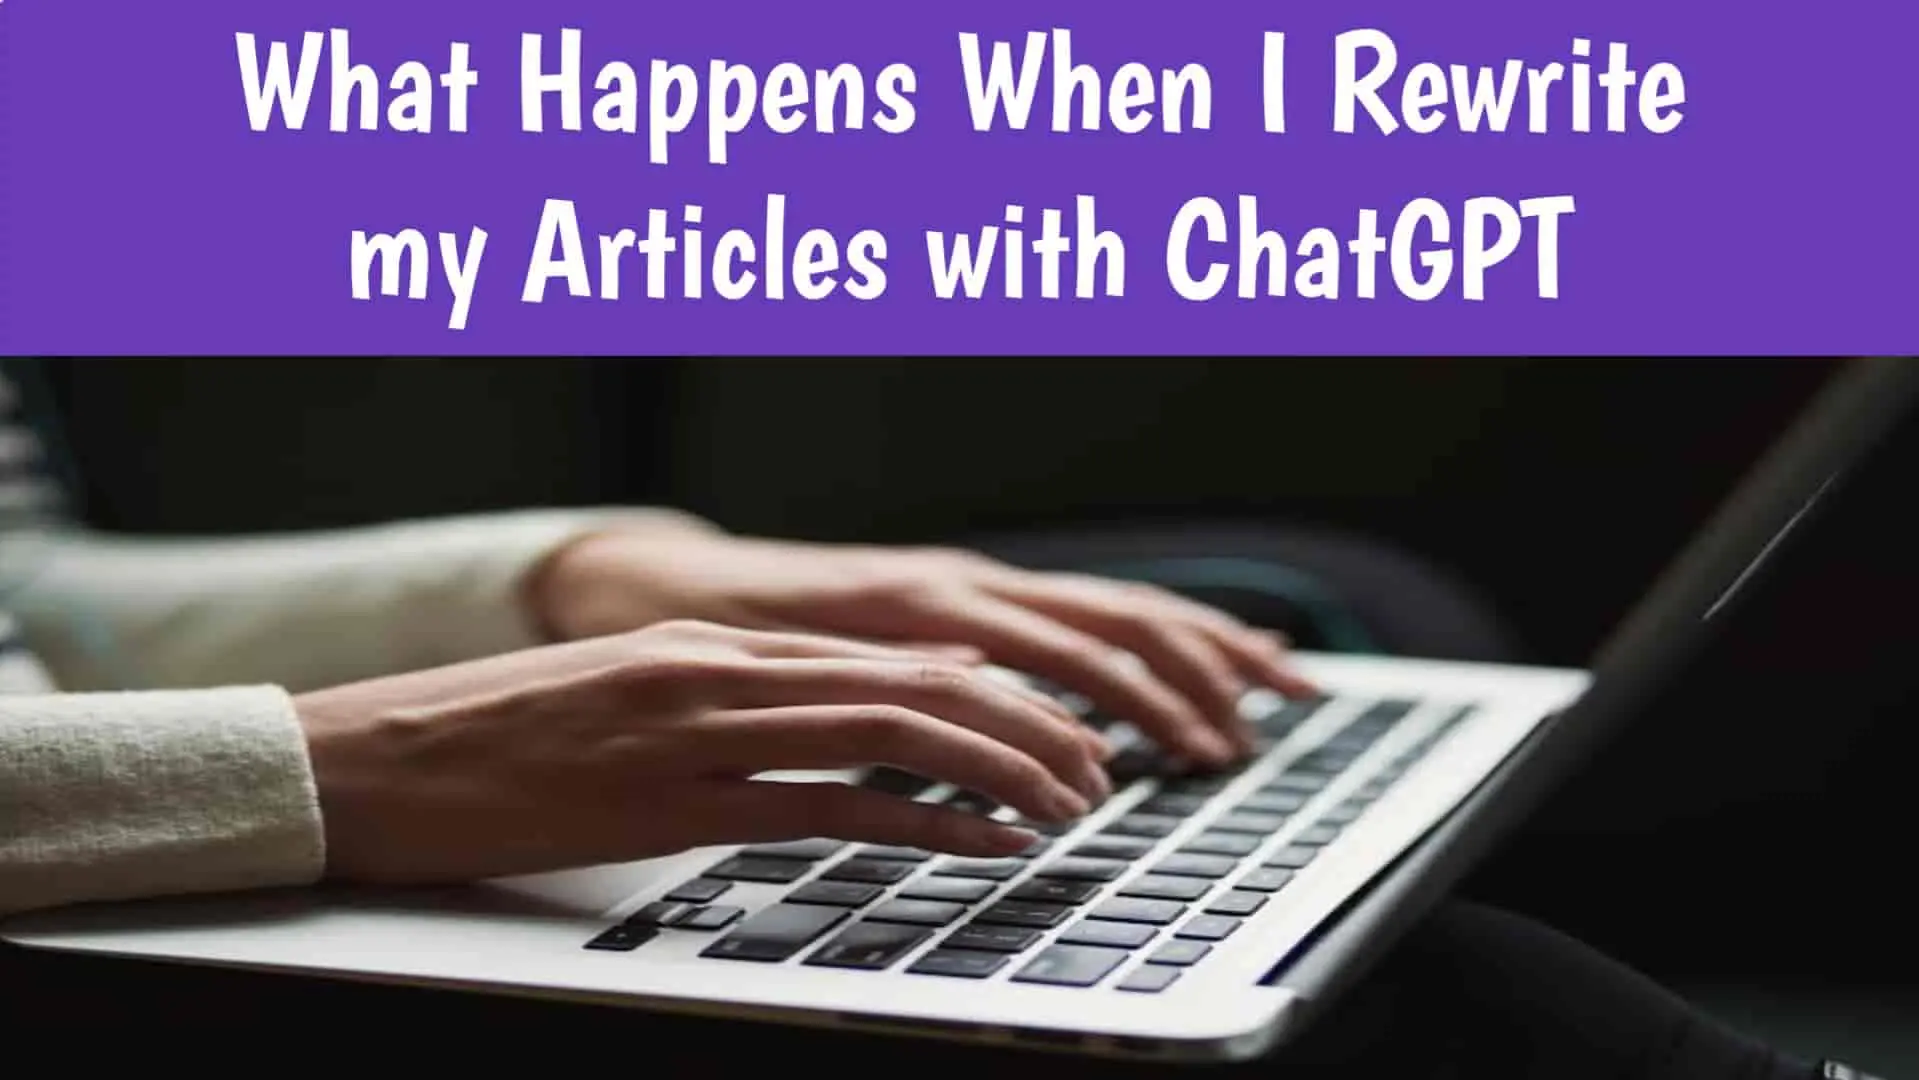 What Happens When I Rewrite my Articles with ChatGPT